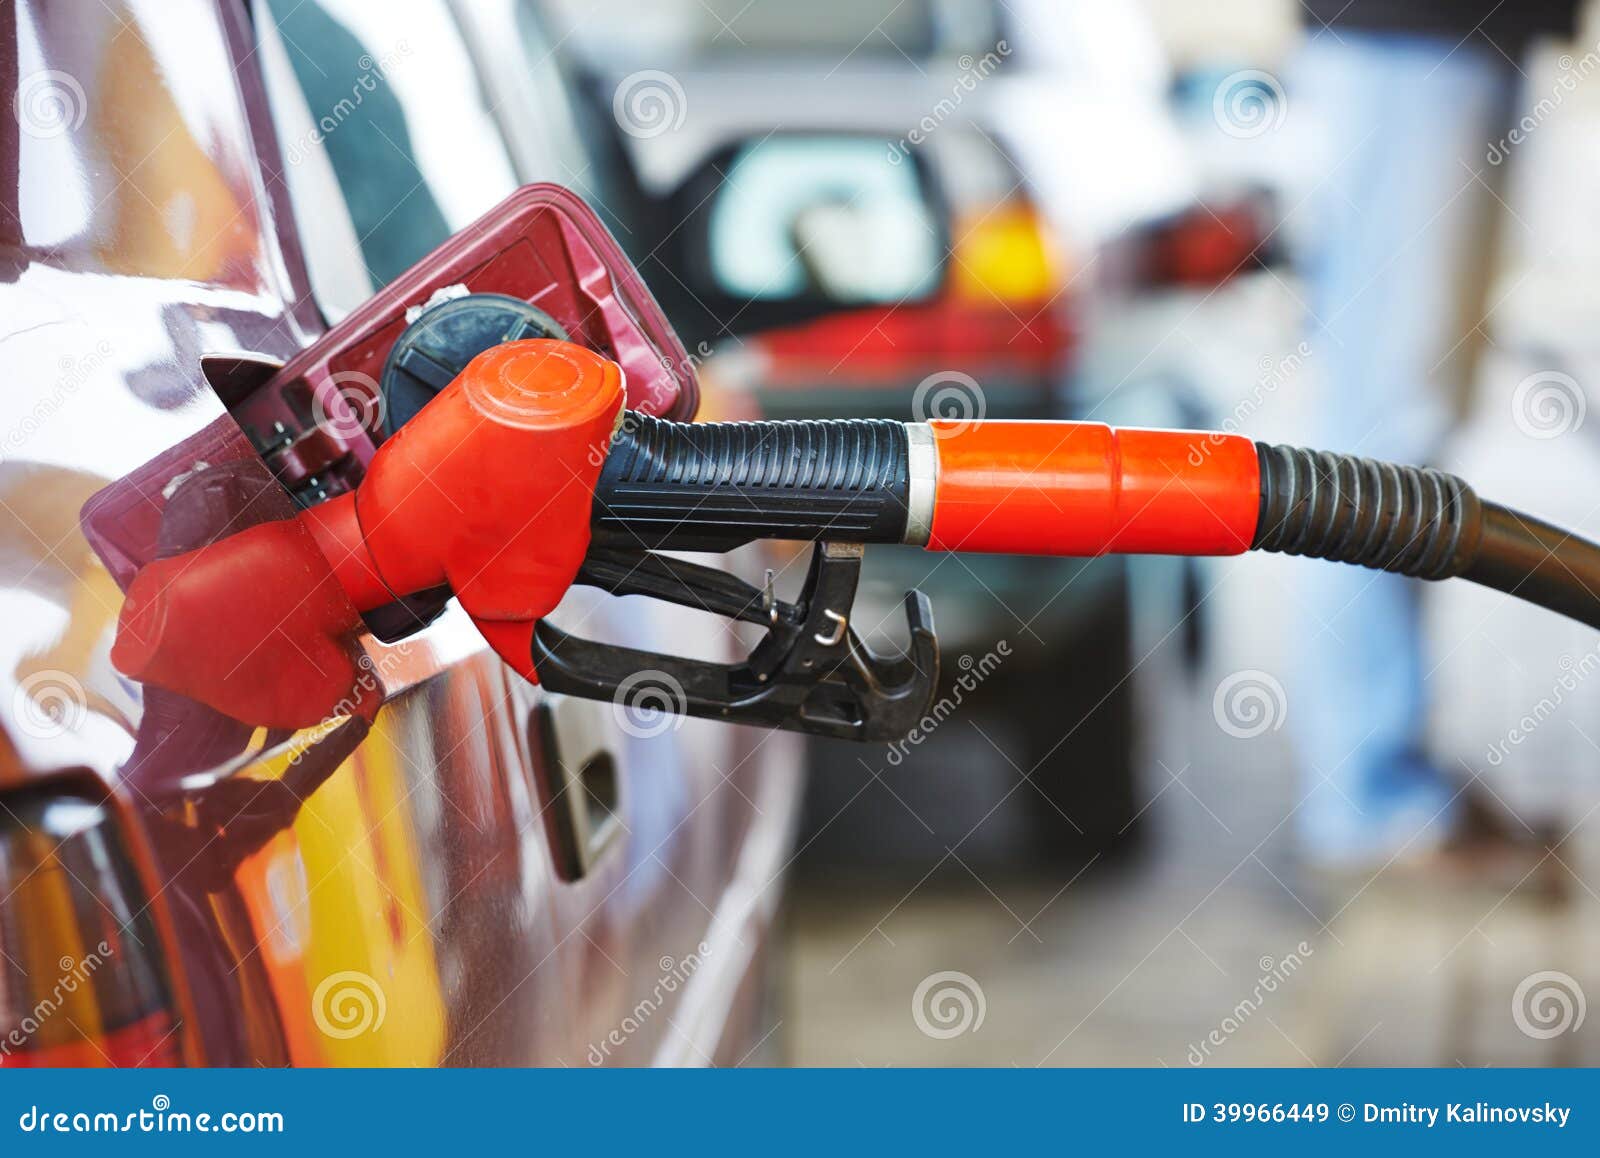 diesel or gasoline fuel nozzle at station